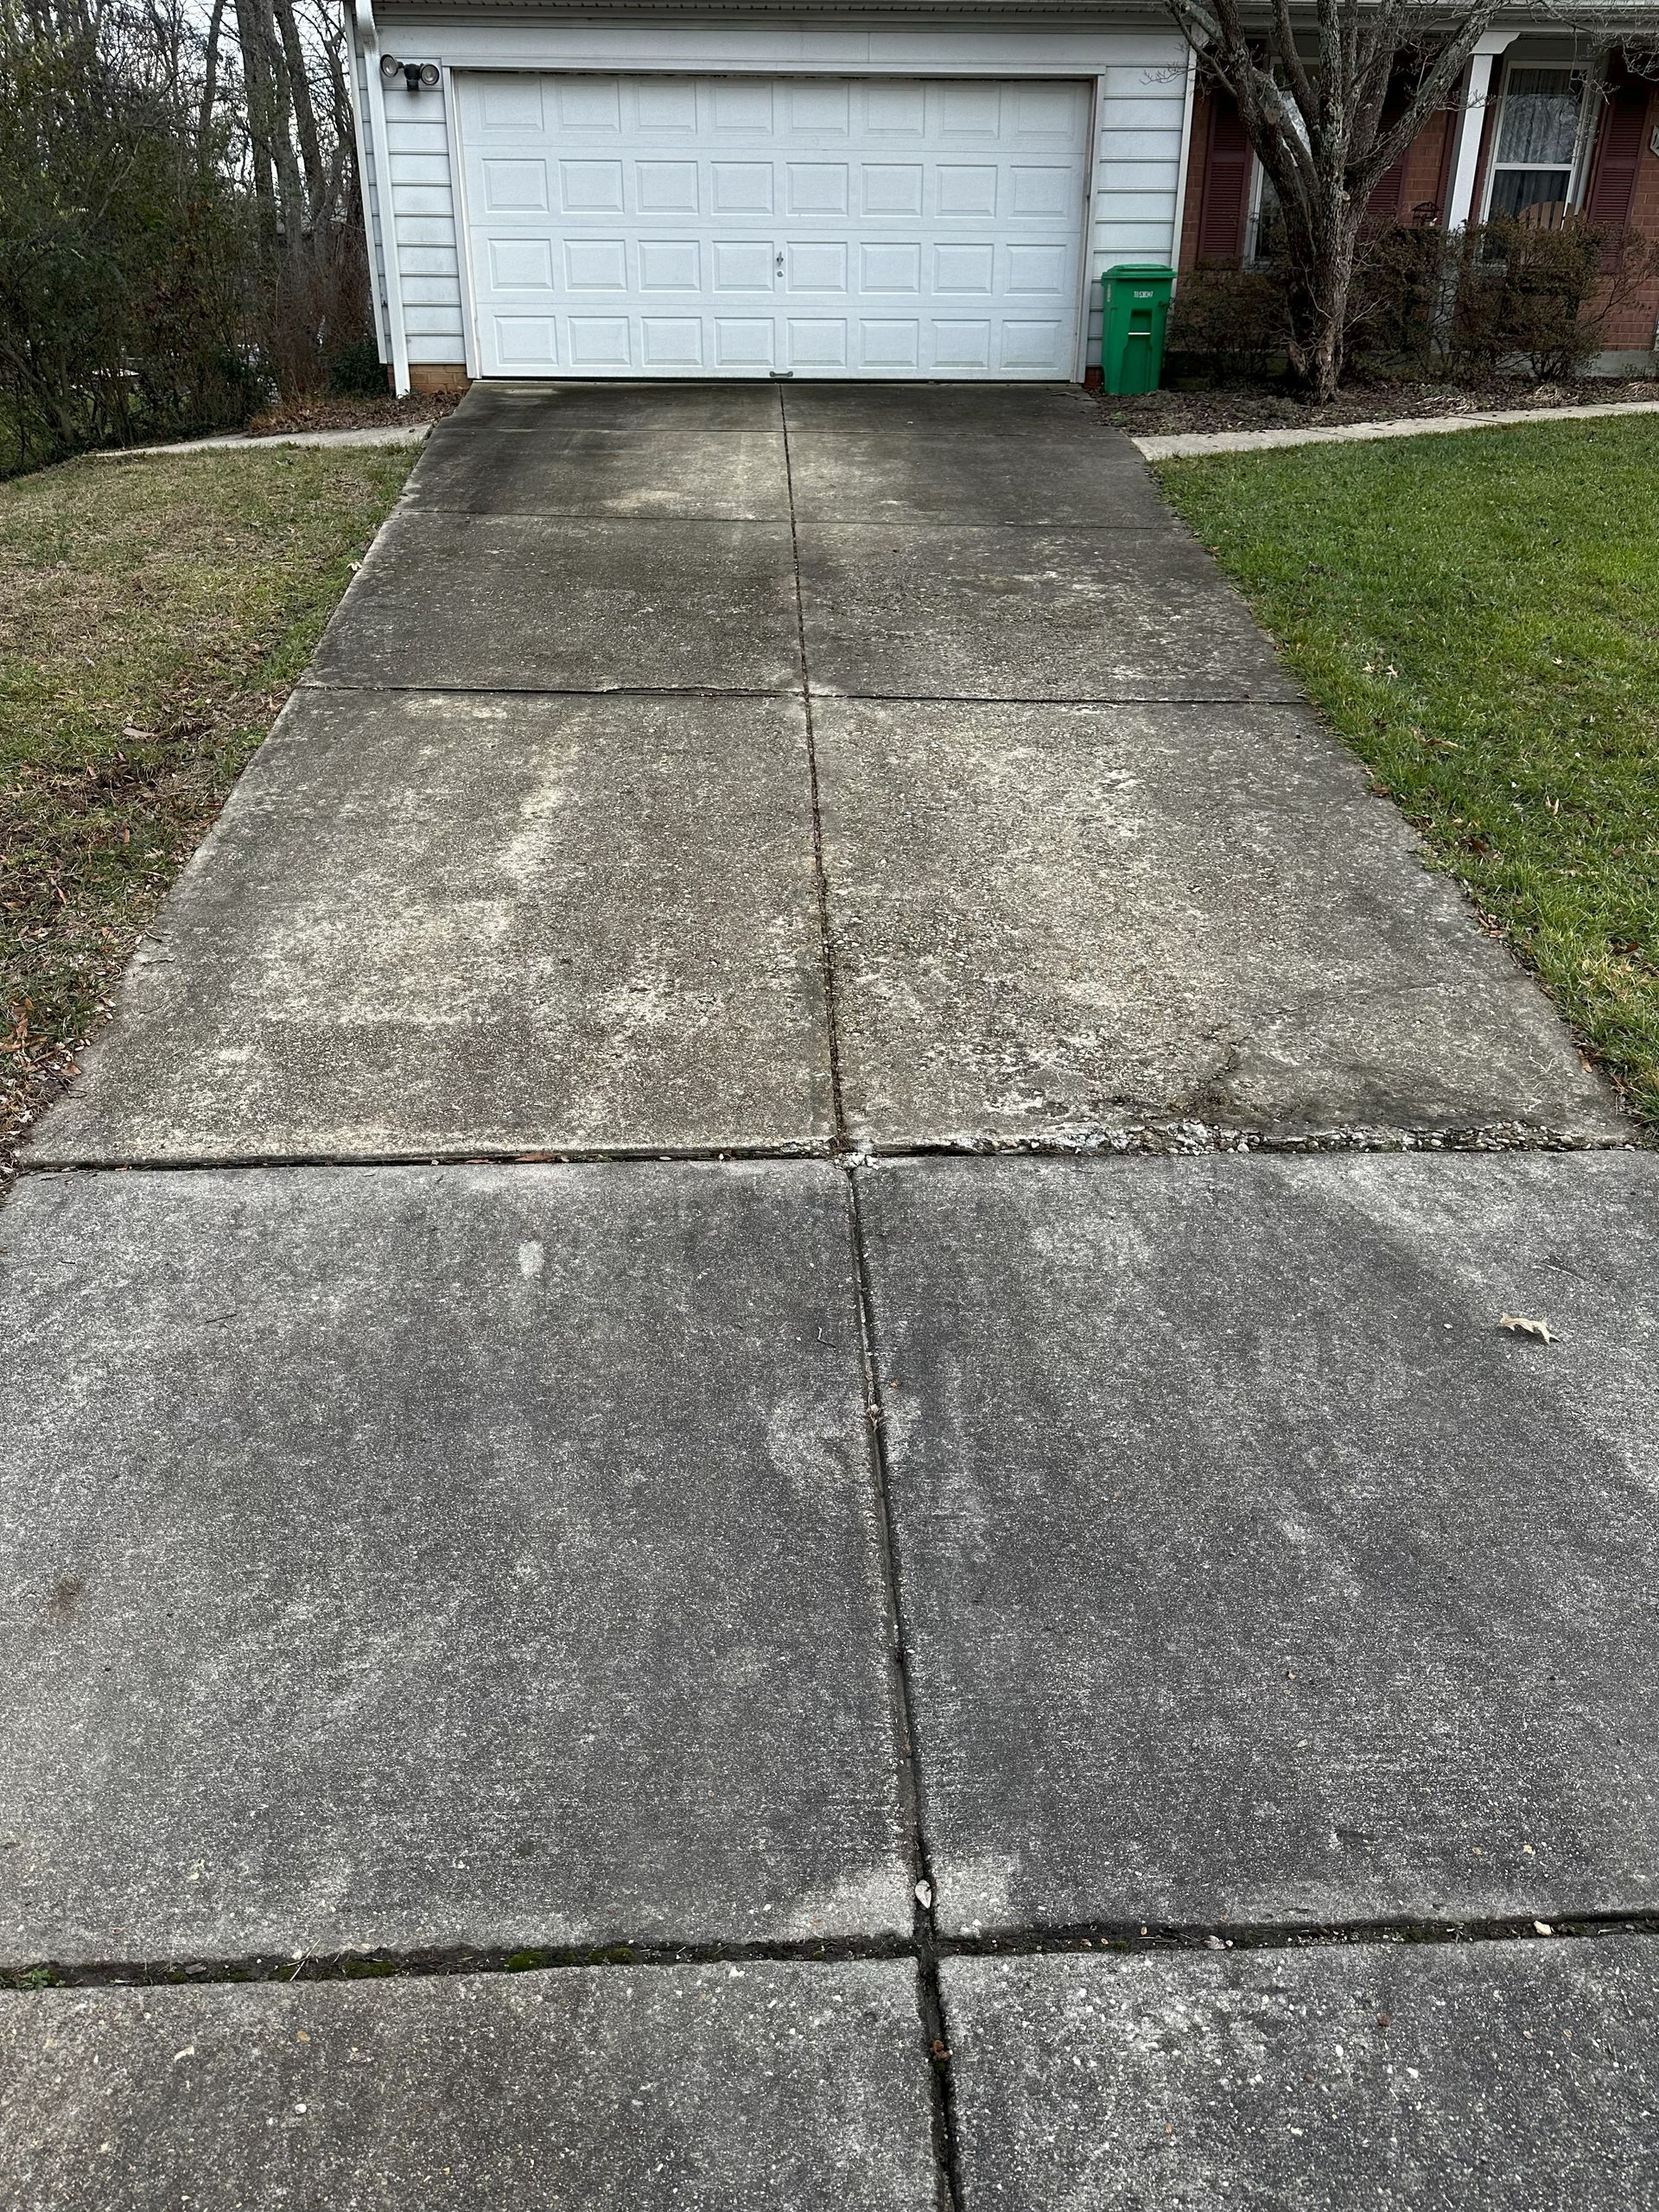 A dirty concrete driveway leading to a garage door.